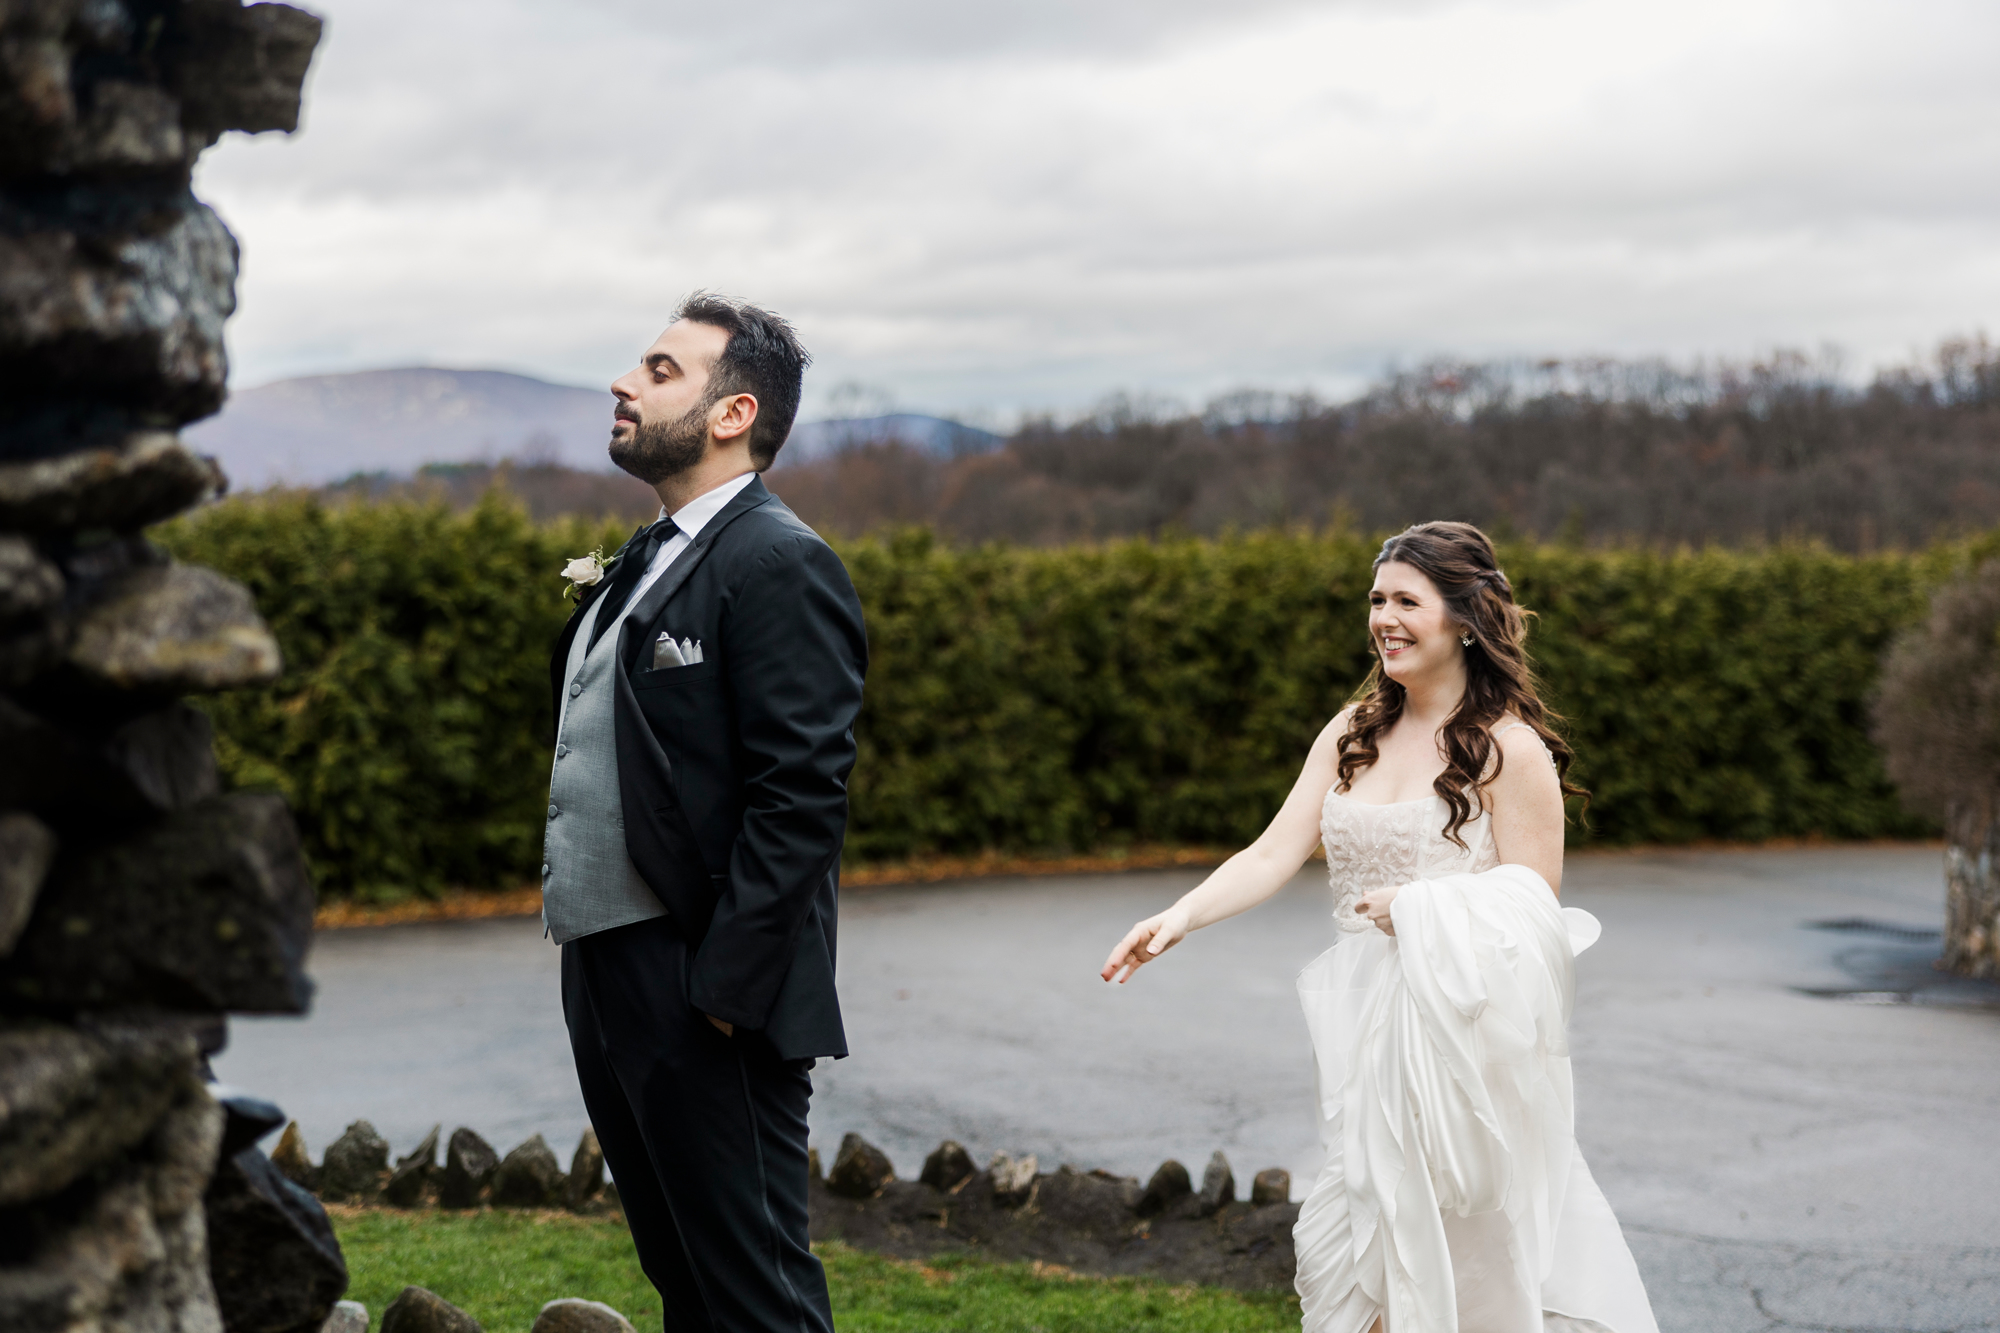 Intimate wedding photography at The Garrison, NY